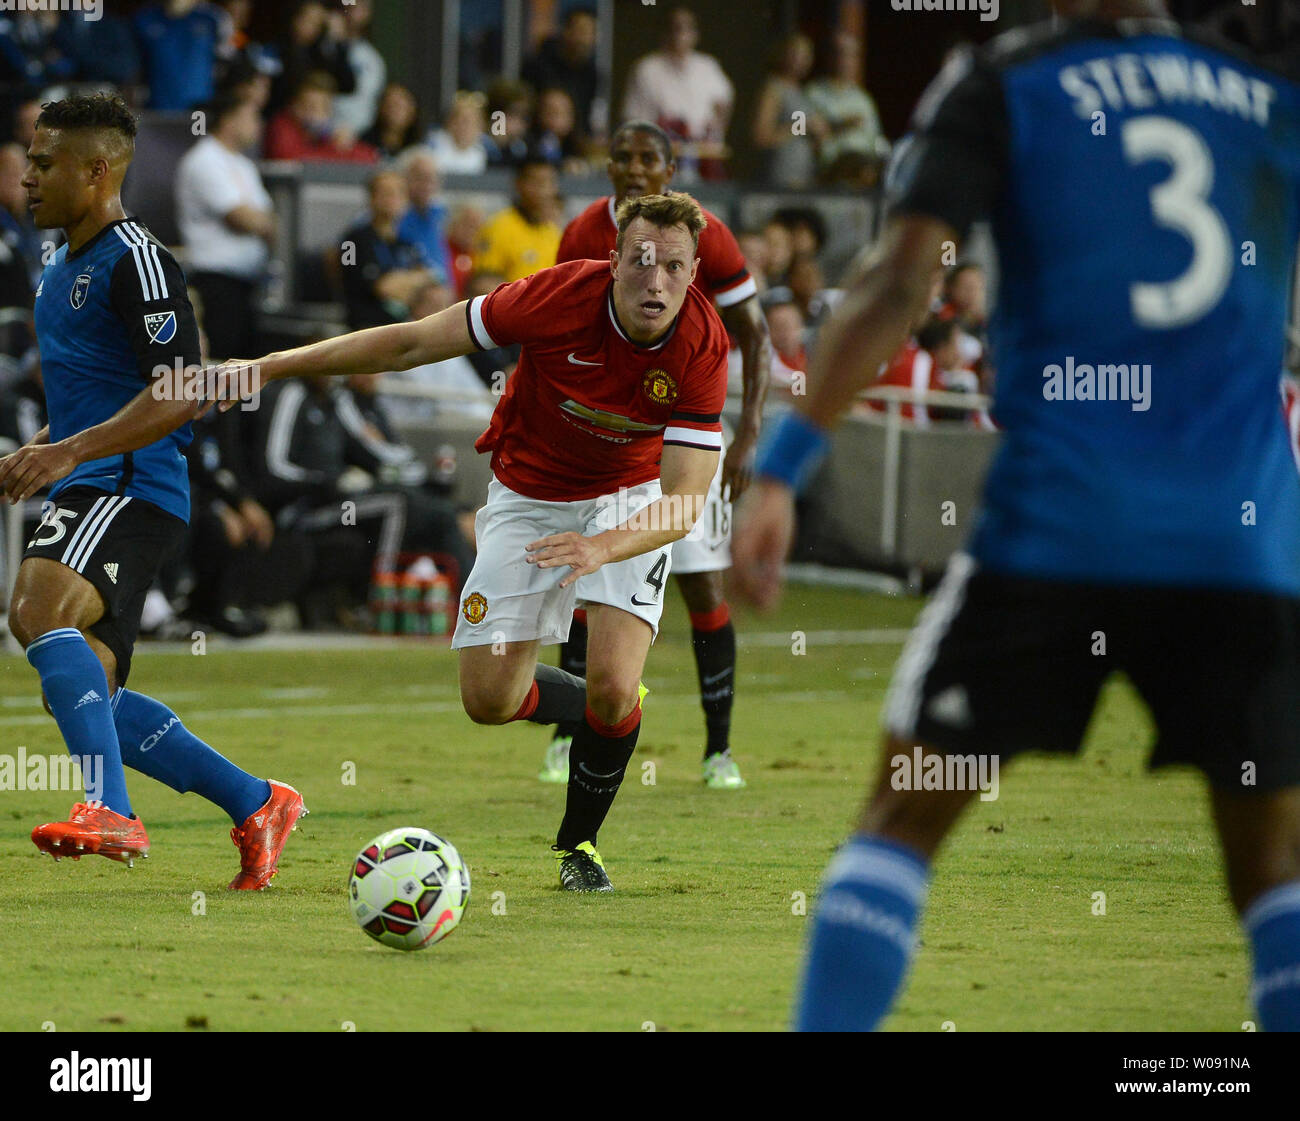 Manchester United's Phil Jones (4) looks to pass against the San Jose Earthquakes in the first half in the 2015 International Champions Cup North America at Avaya Stadium in San Jose, California on July 21, 2015. Manchester defeated San Jose 3-1.    Photo by Terry Schmitt/UPI Stock Photo